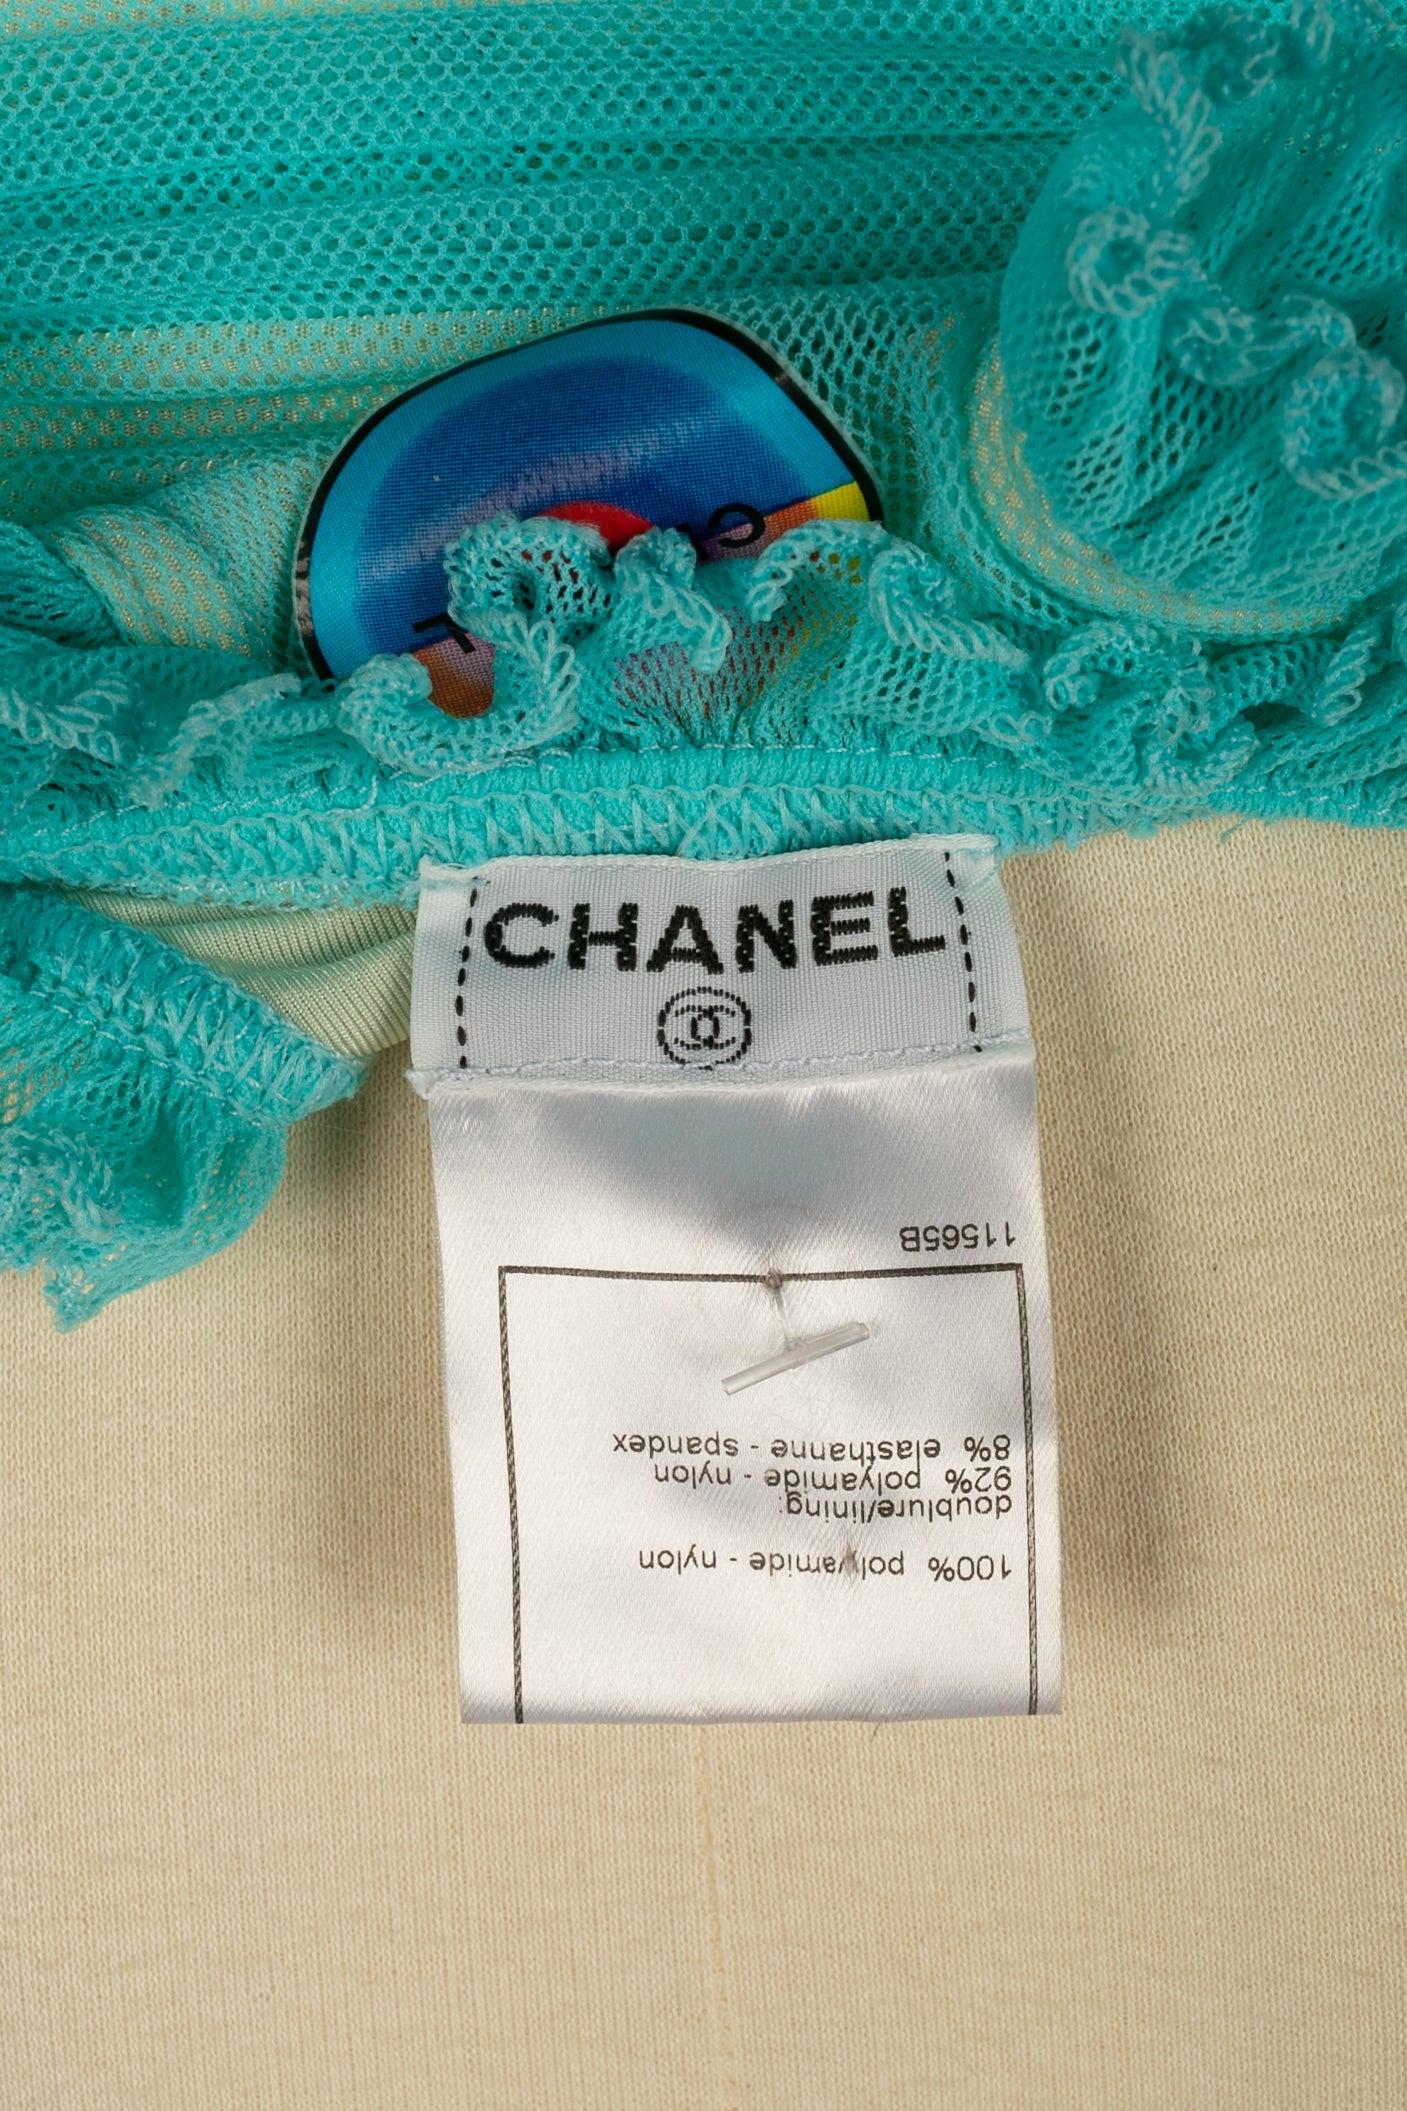 Chanel Turquoise Swimsuit / Bodysuit, 2001 For Sale 4